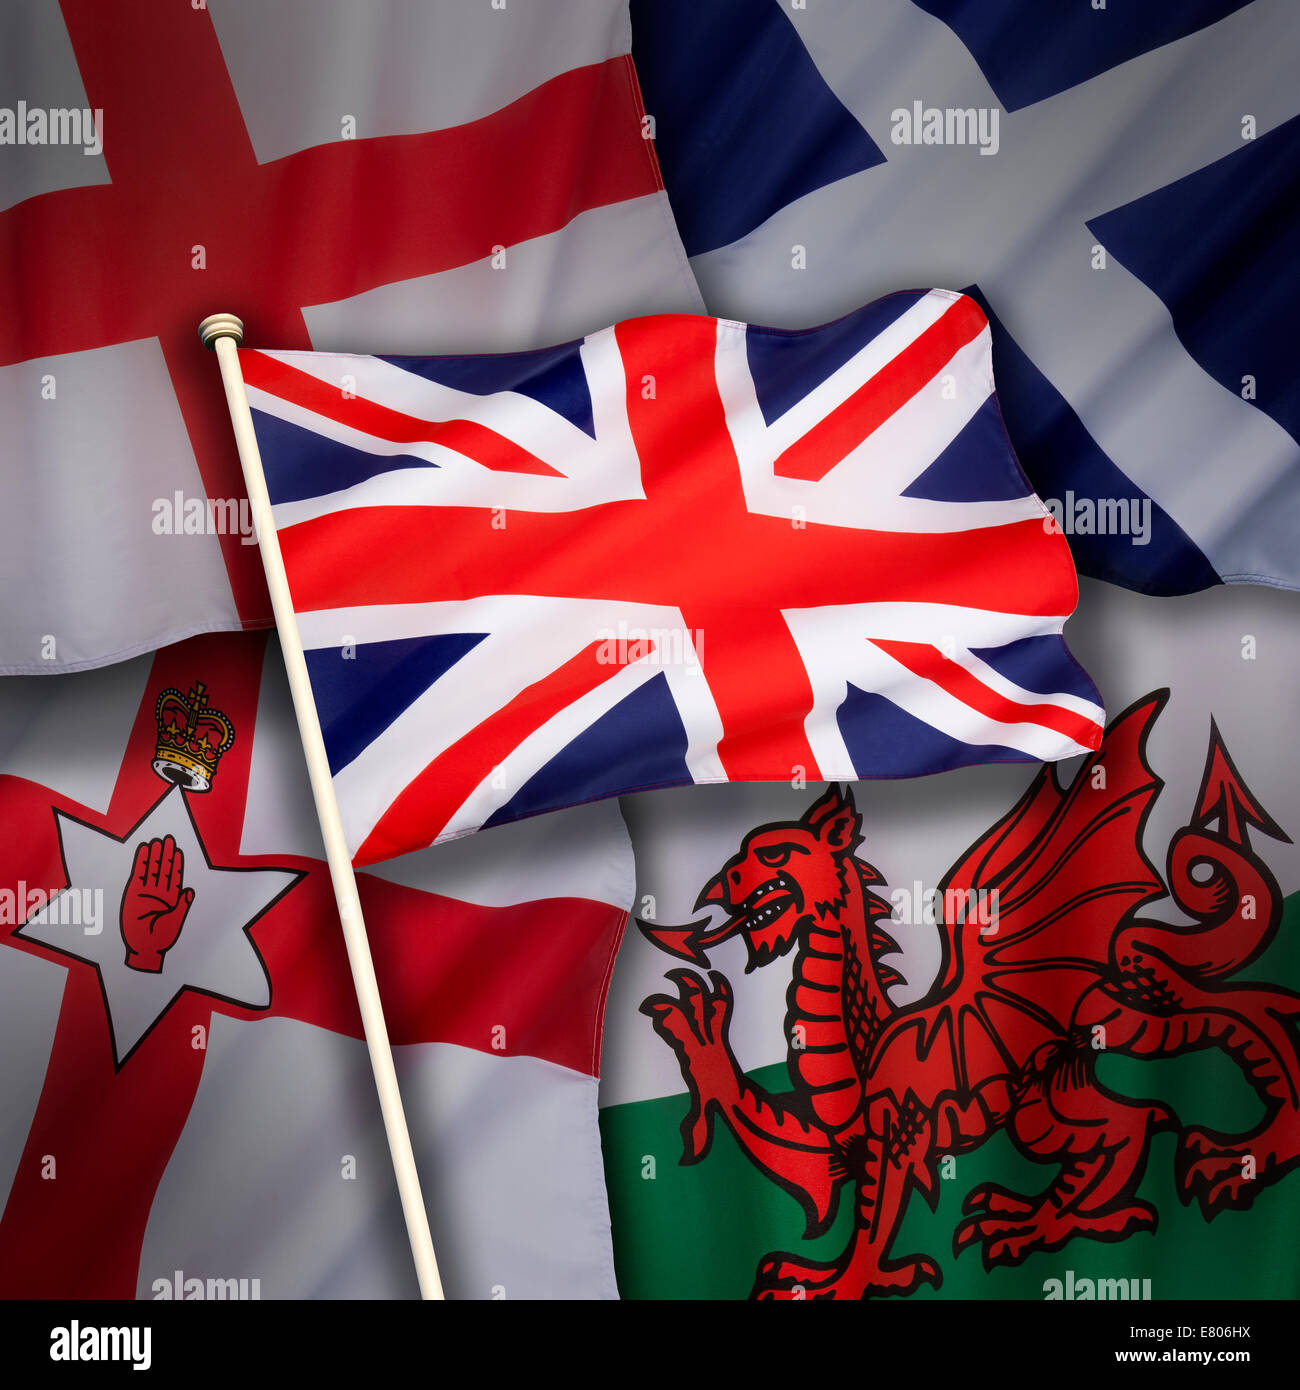 The flags of the United Kingdom of Great Britain - England, Scotland, Wales and Northern Ireland. Stock Photo